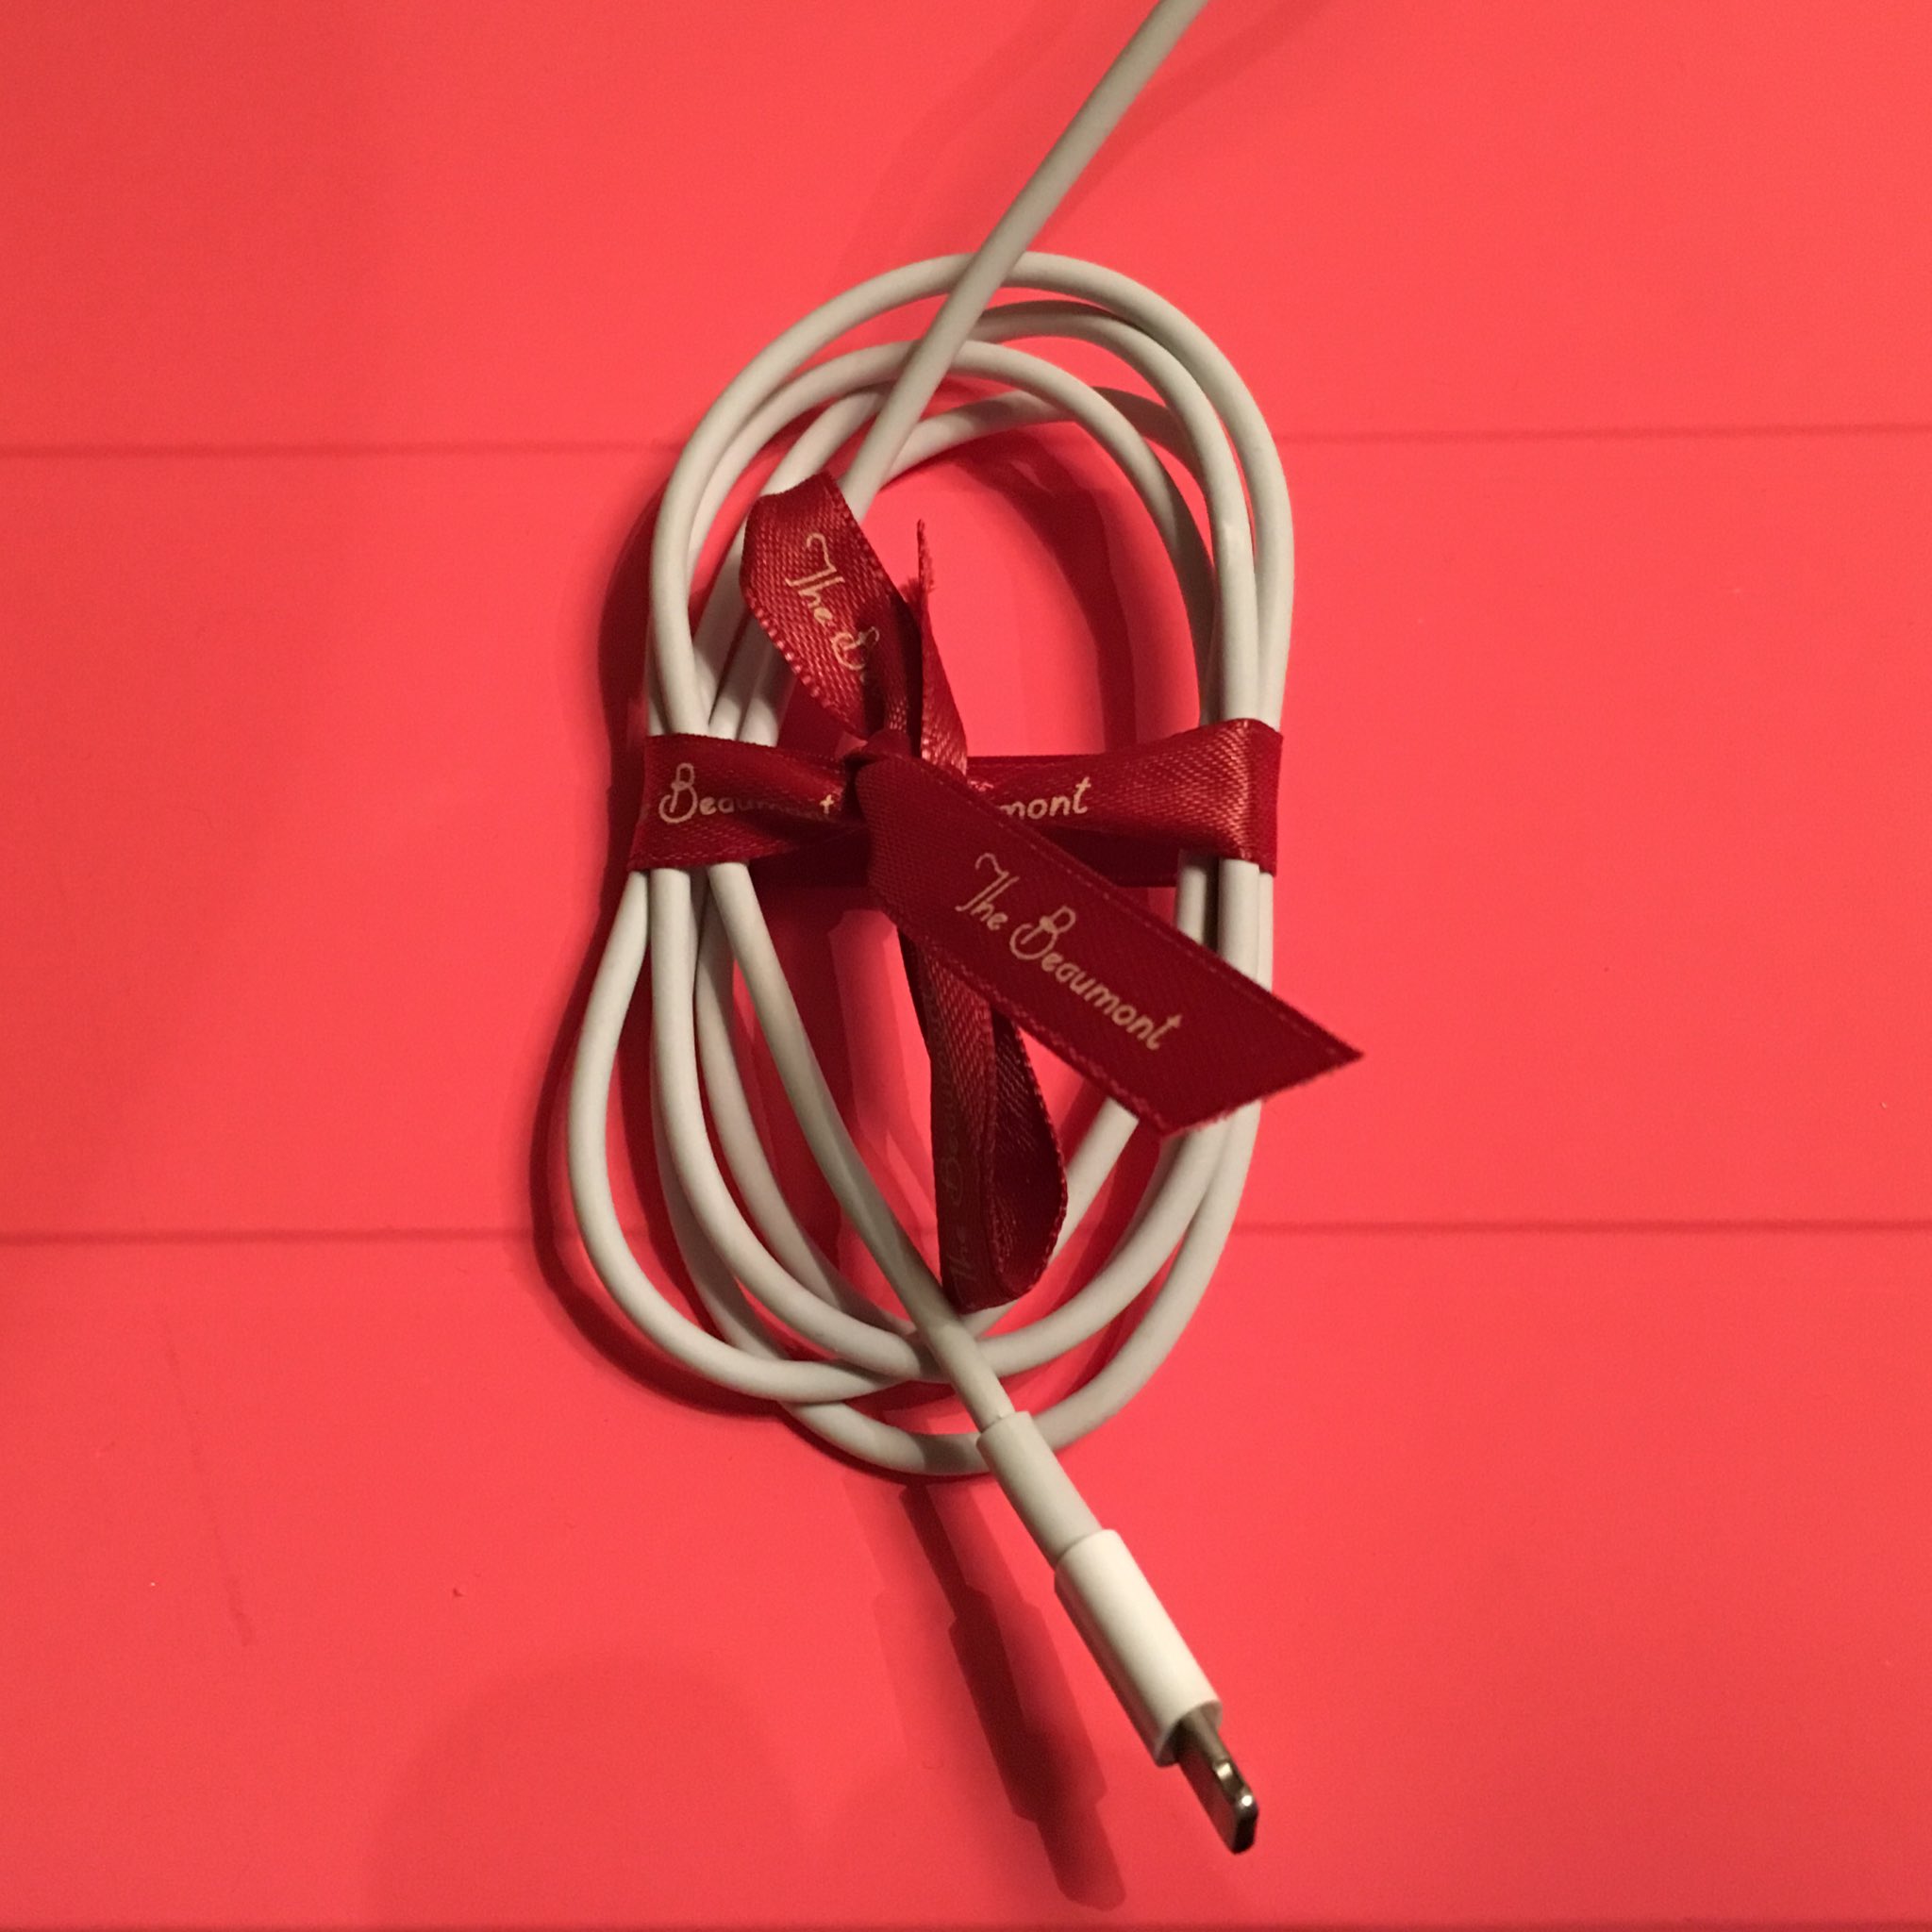 My hotel keeps tidying up my iPhone charging cable with a twee little ribbon and I'm starting to feel a little judged. https://t.co/cbrQzUM7vh